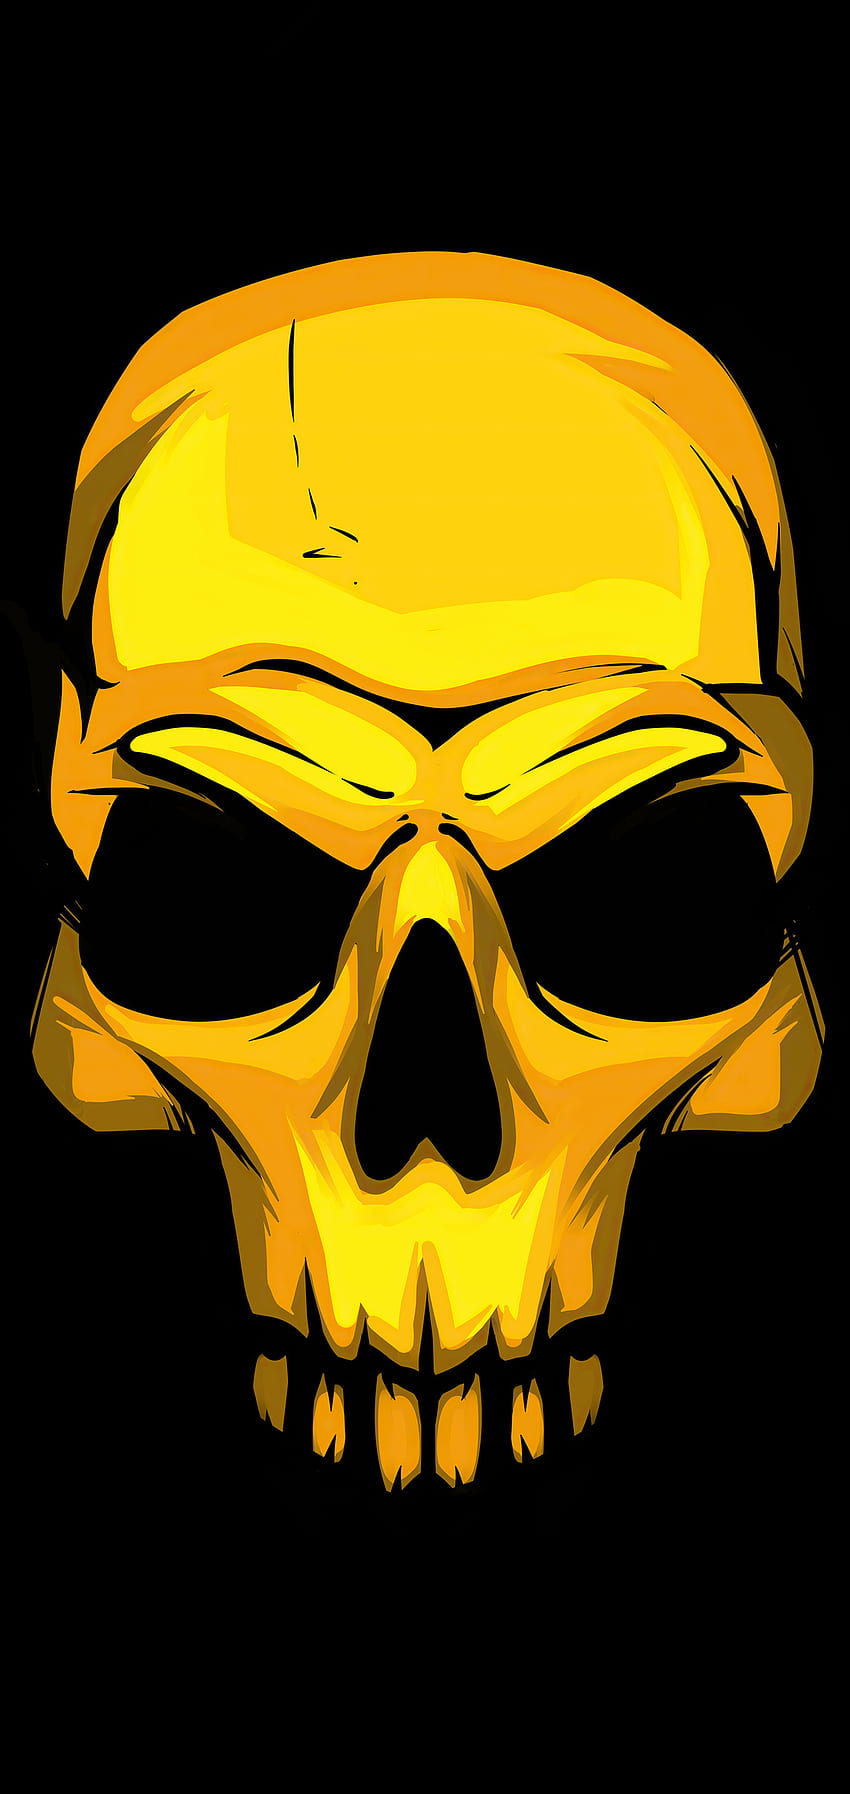 Gold Skull Dark Background One Plus 6, Huawei p20, Honor view 10, Vivo y85, Oppo f7, Xiaomi Mi A2, , Background 및 , Black and Gold Skull HD 전화 배경 화면